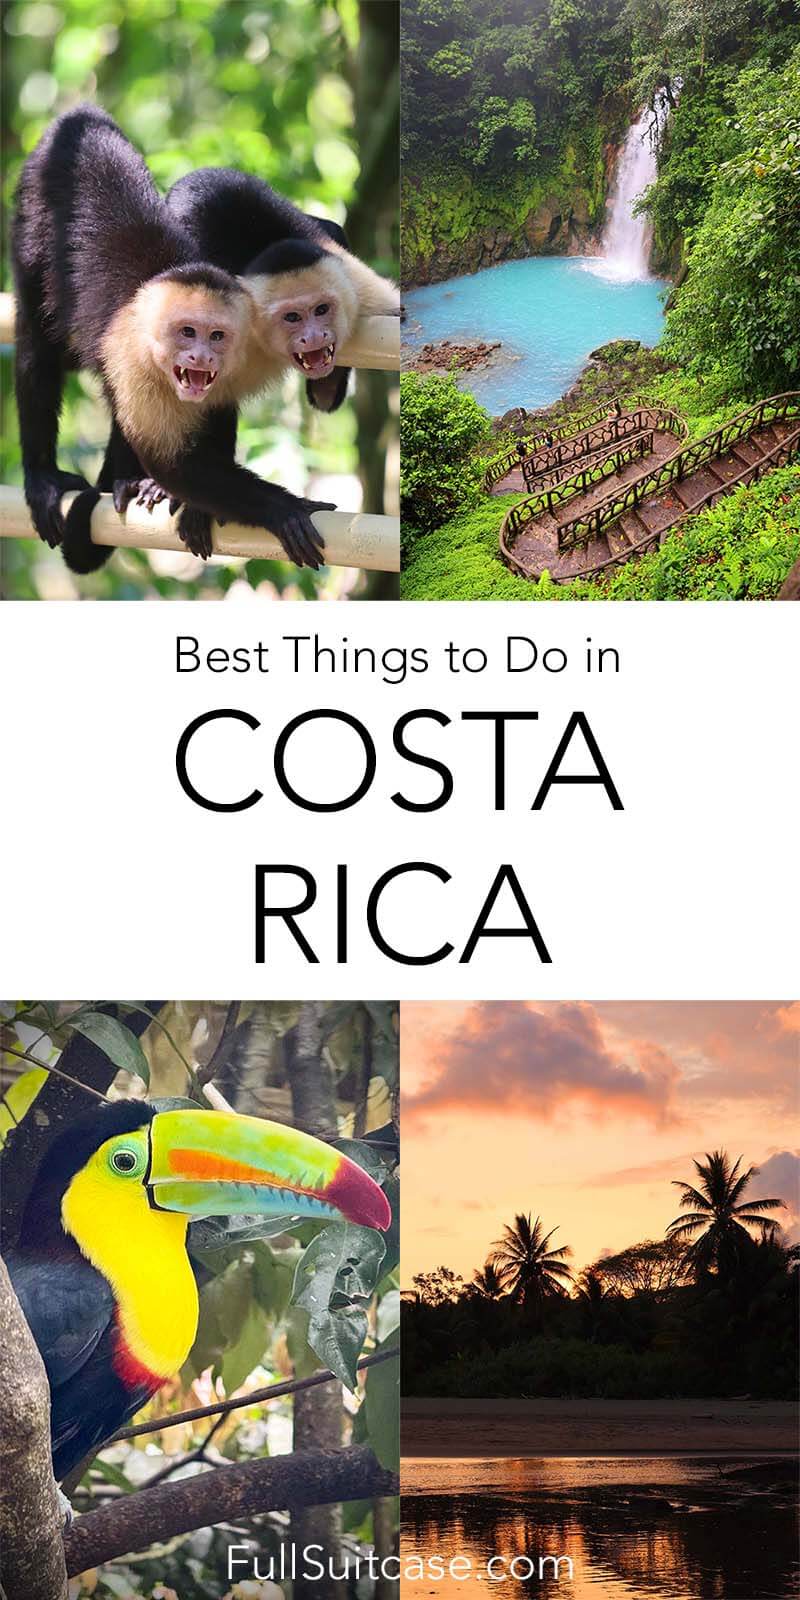 Best things to do in Costa Rica